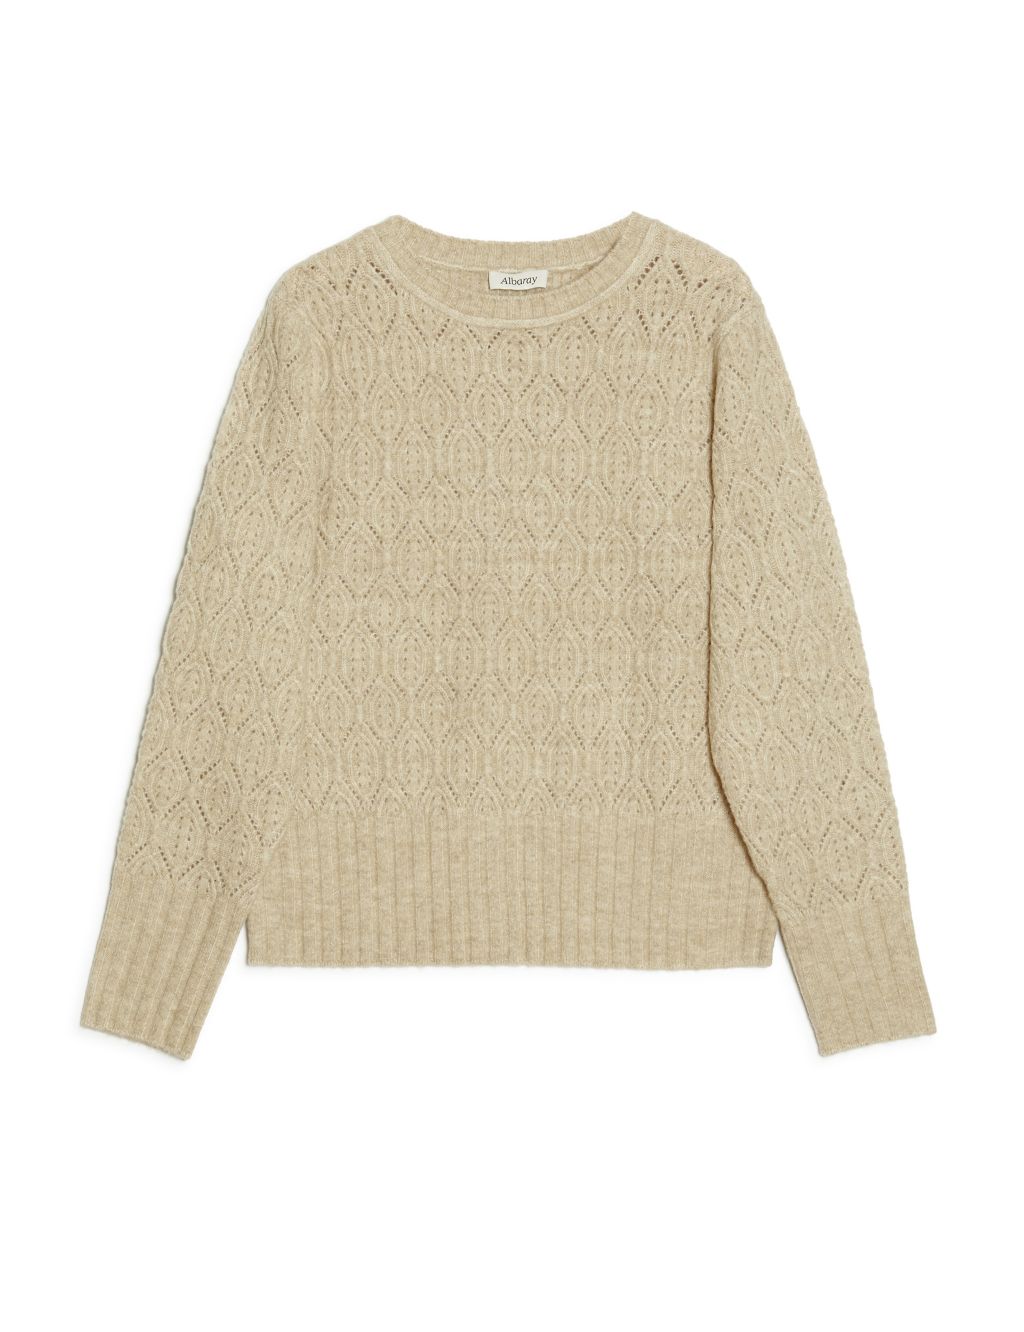 Pointelle Cable Knit Crew Neck Jumper image 2